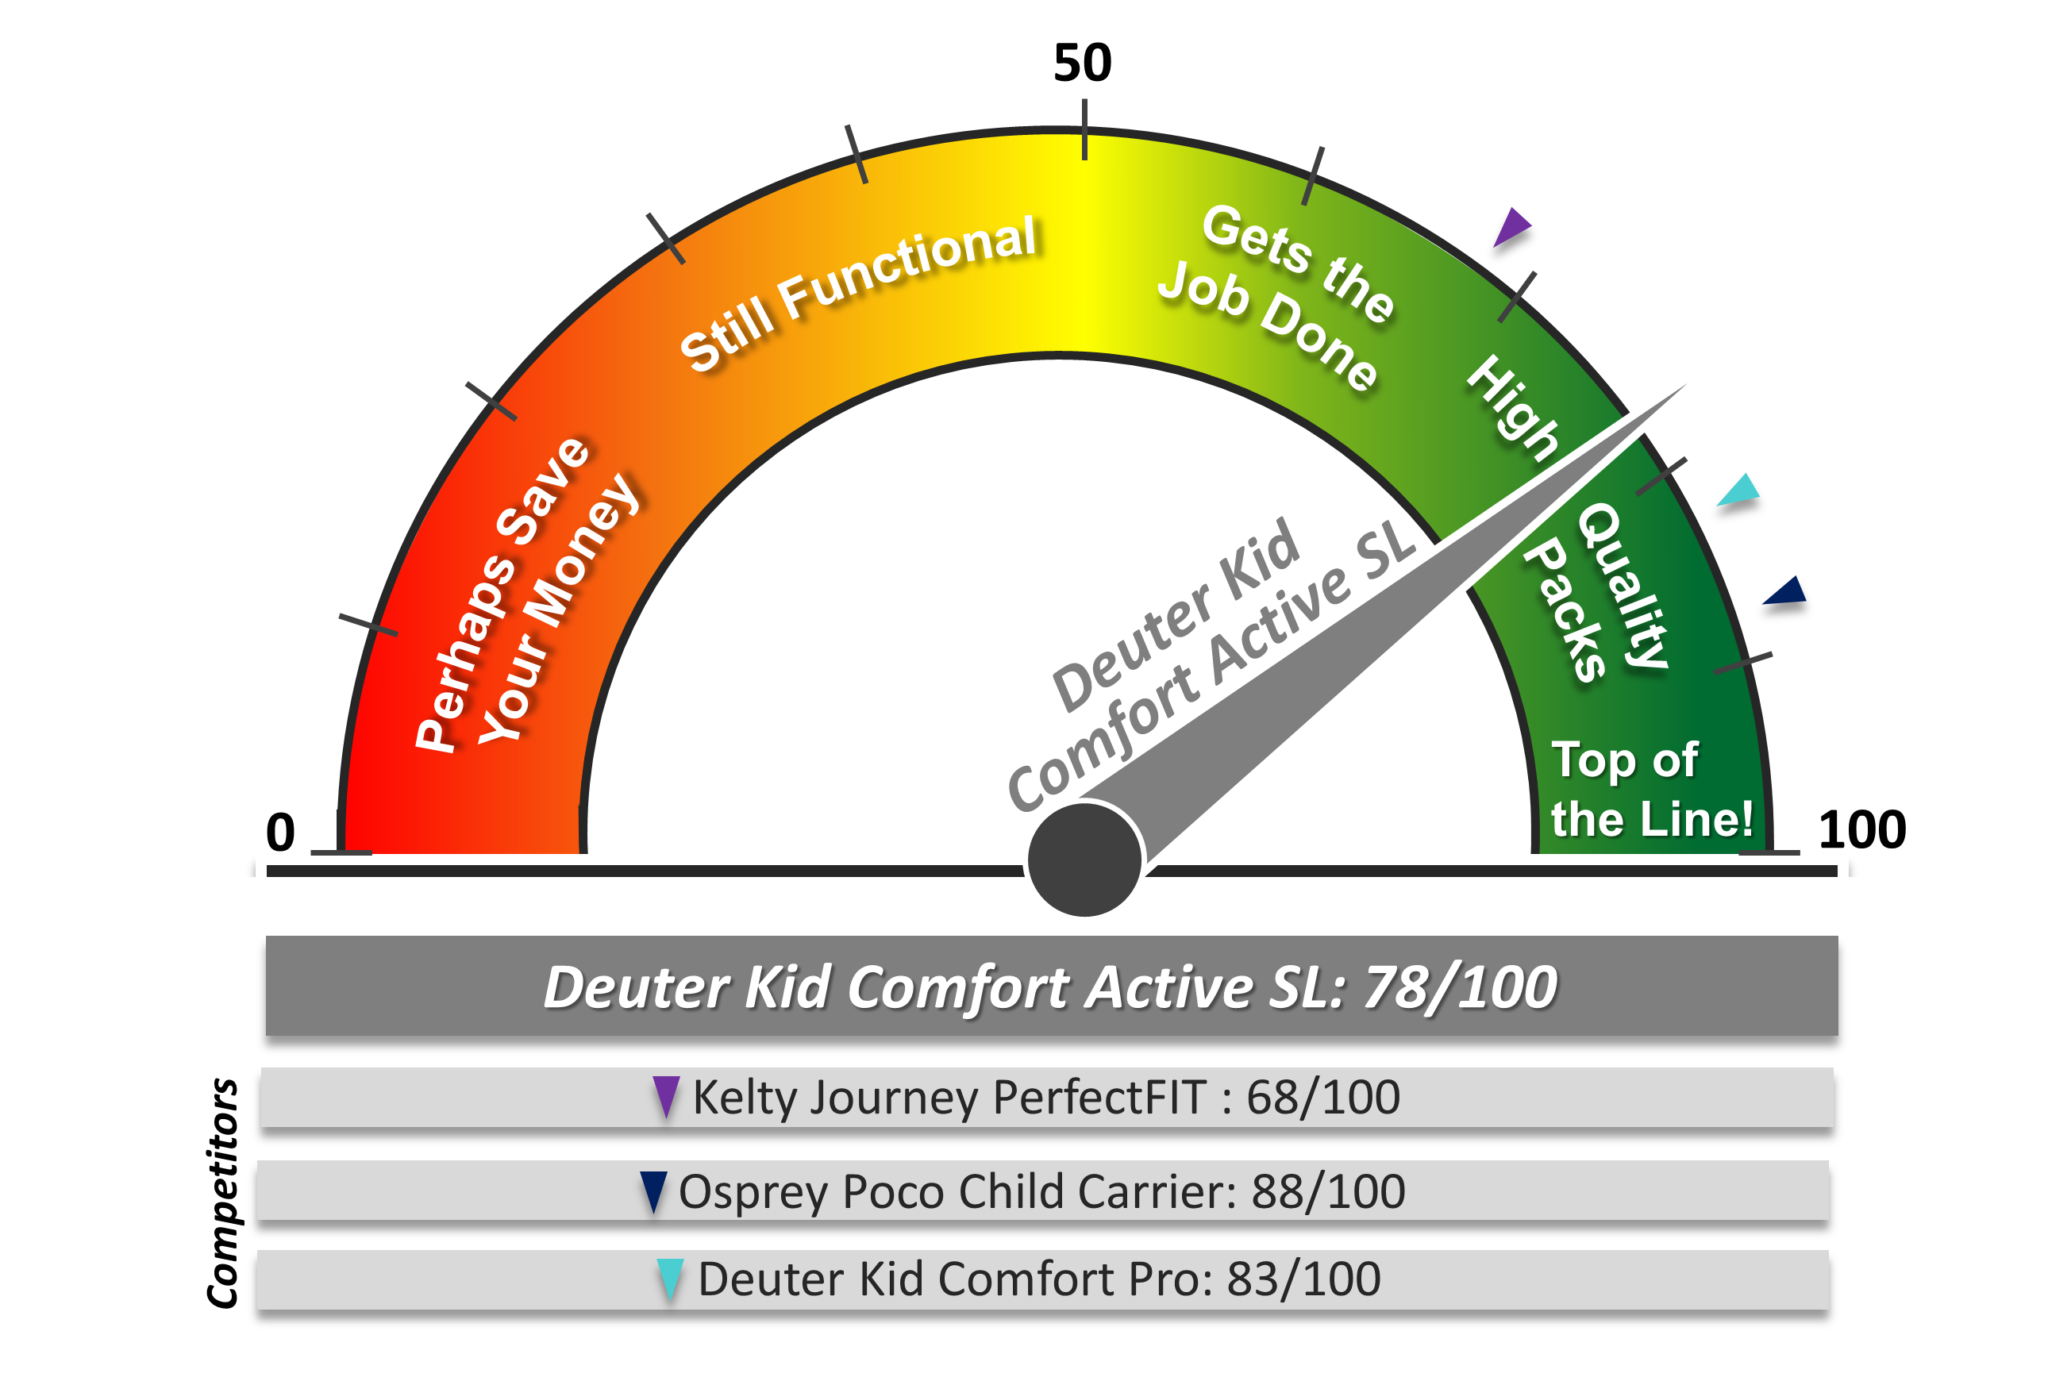 Dial diagram showing overall score for the Deuter Kid Comfort Active SL